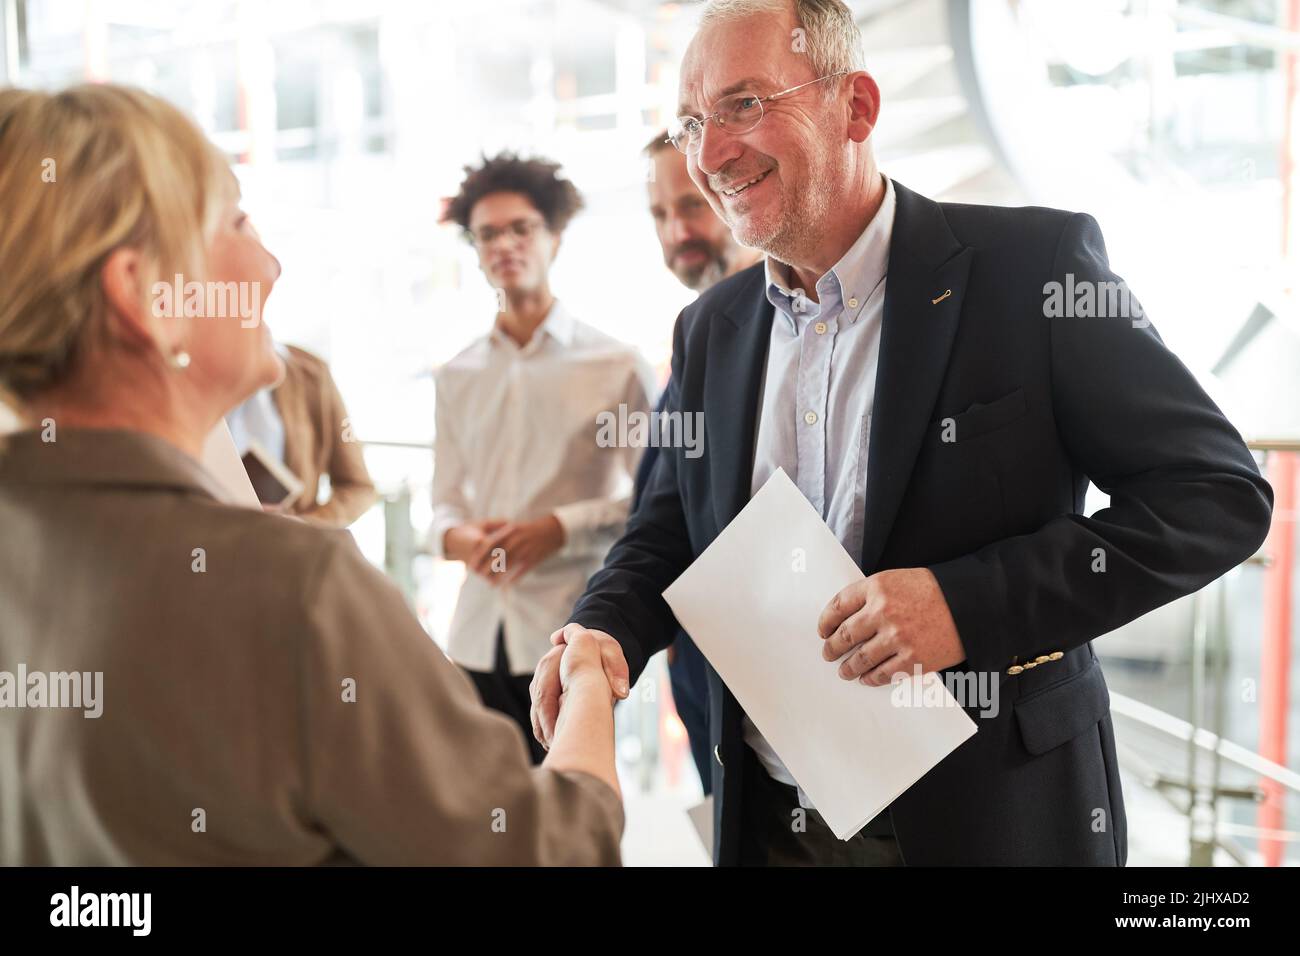 Senior business man as manager shaking hands for greeting or joint venture Stock Photo